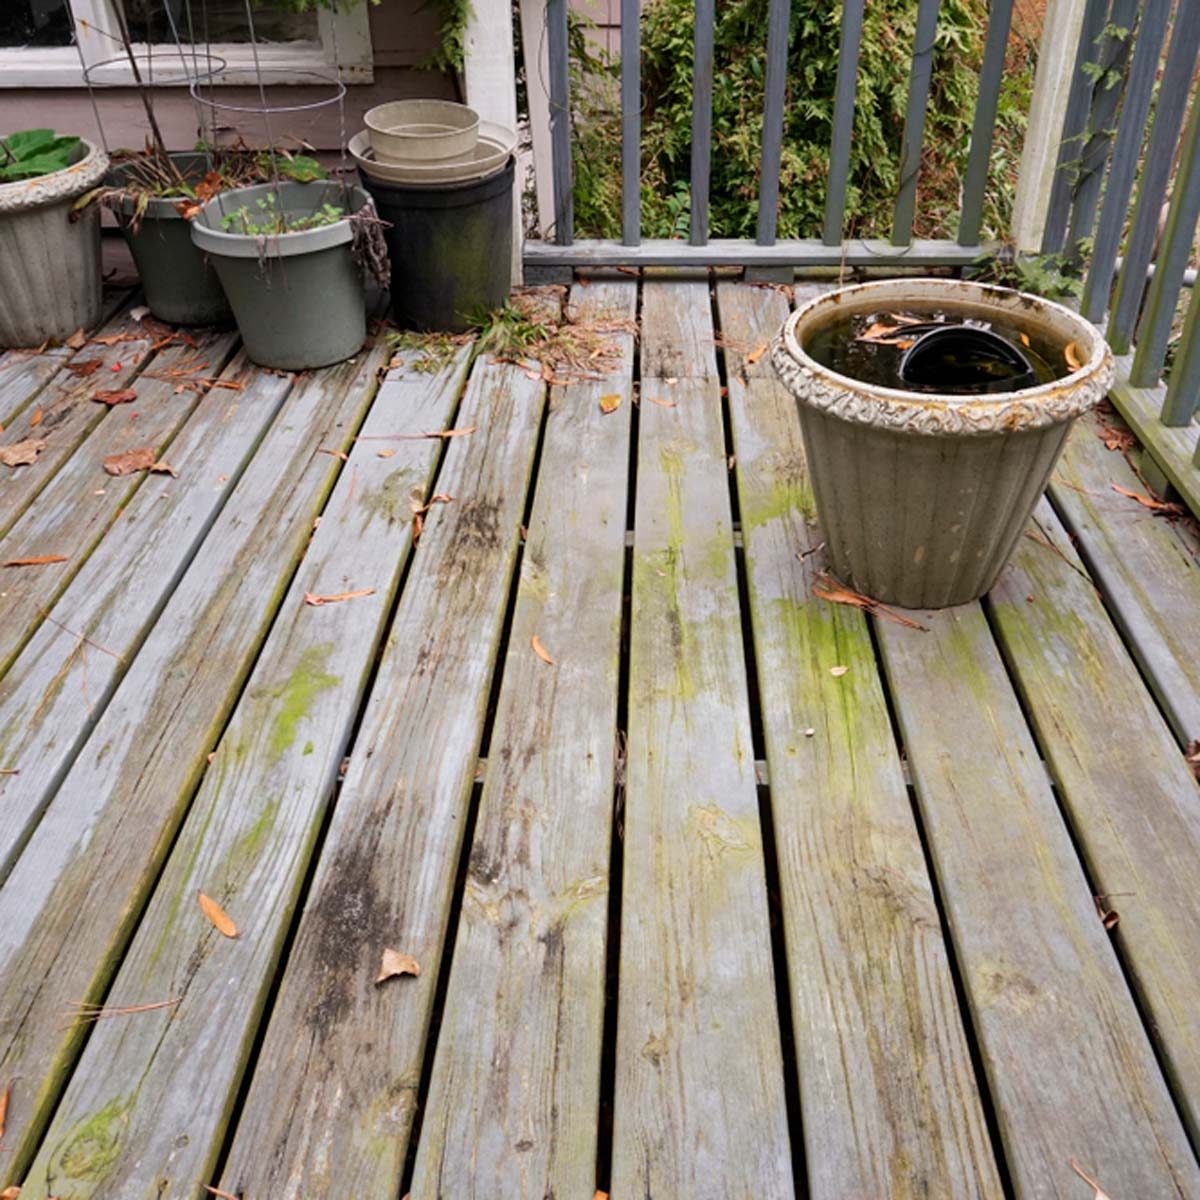 Can outdoor carpet (the green stuff) be applied to an exposed deck?